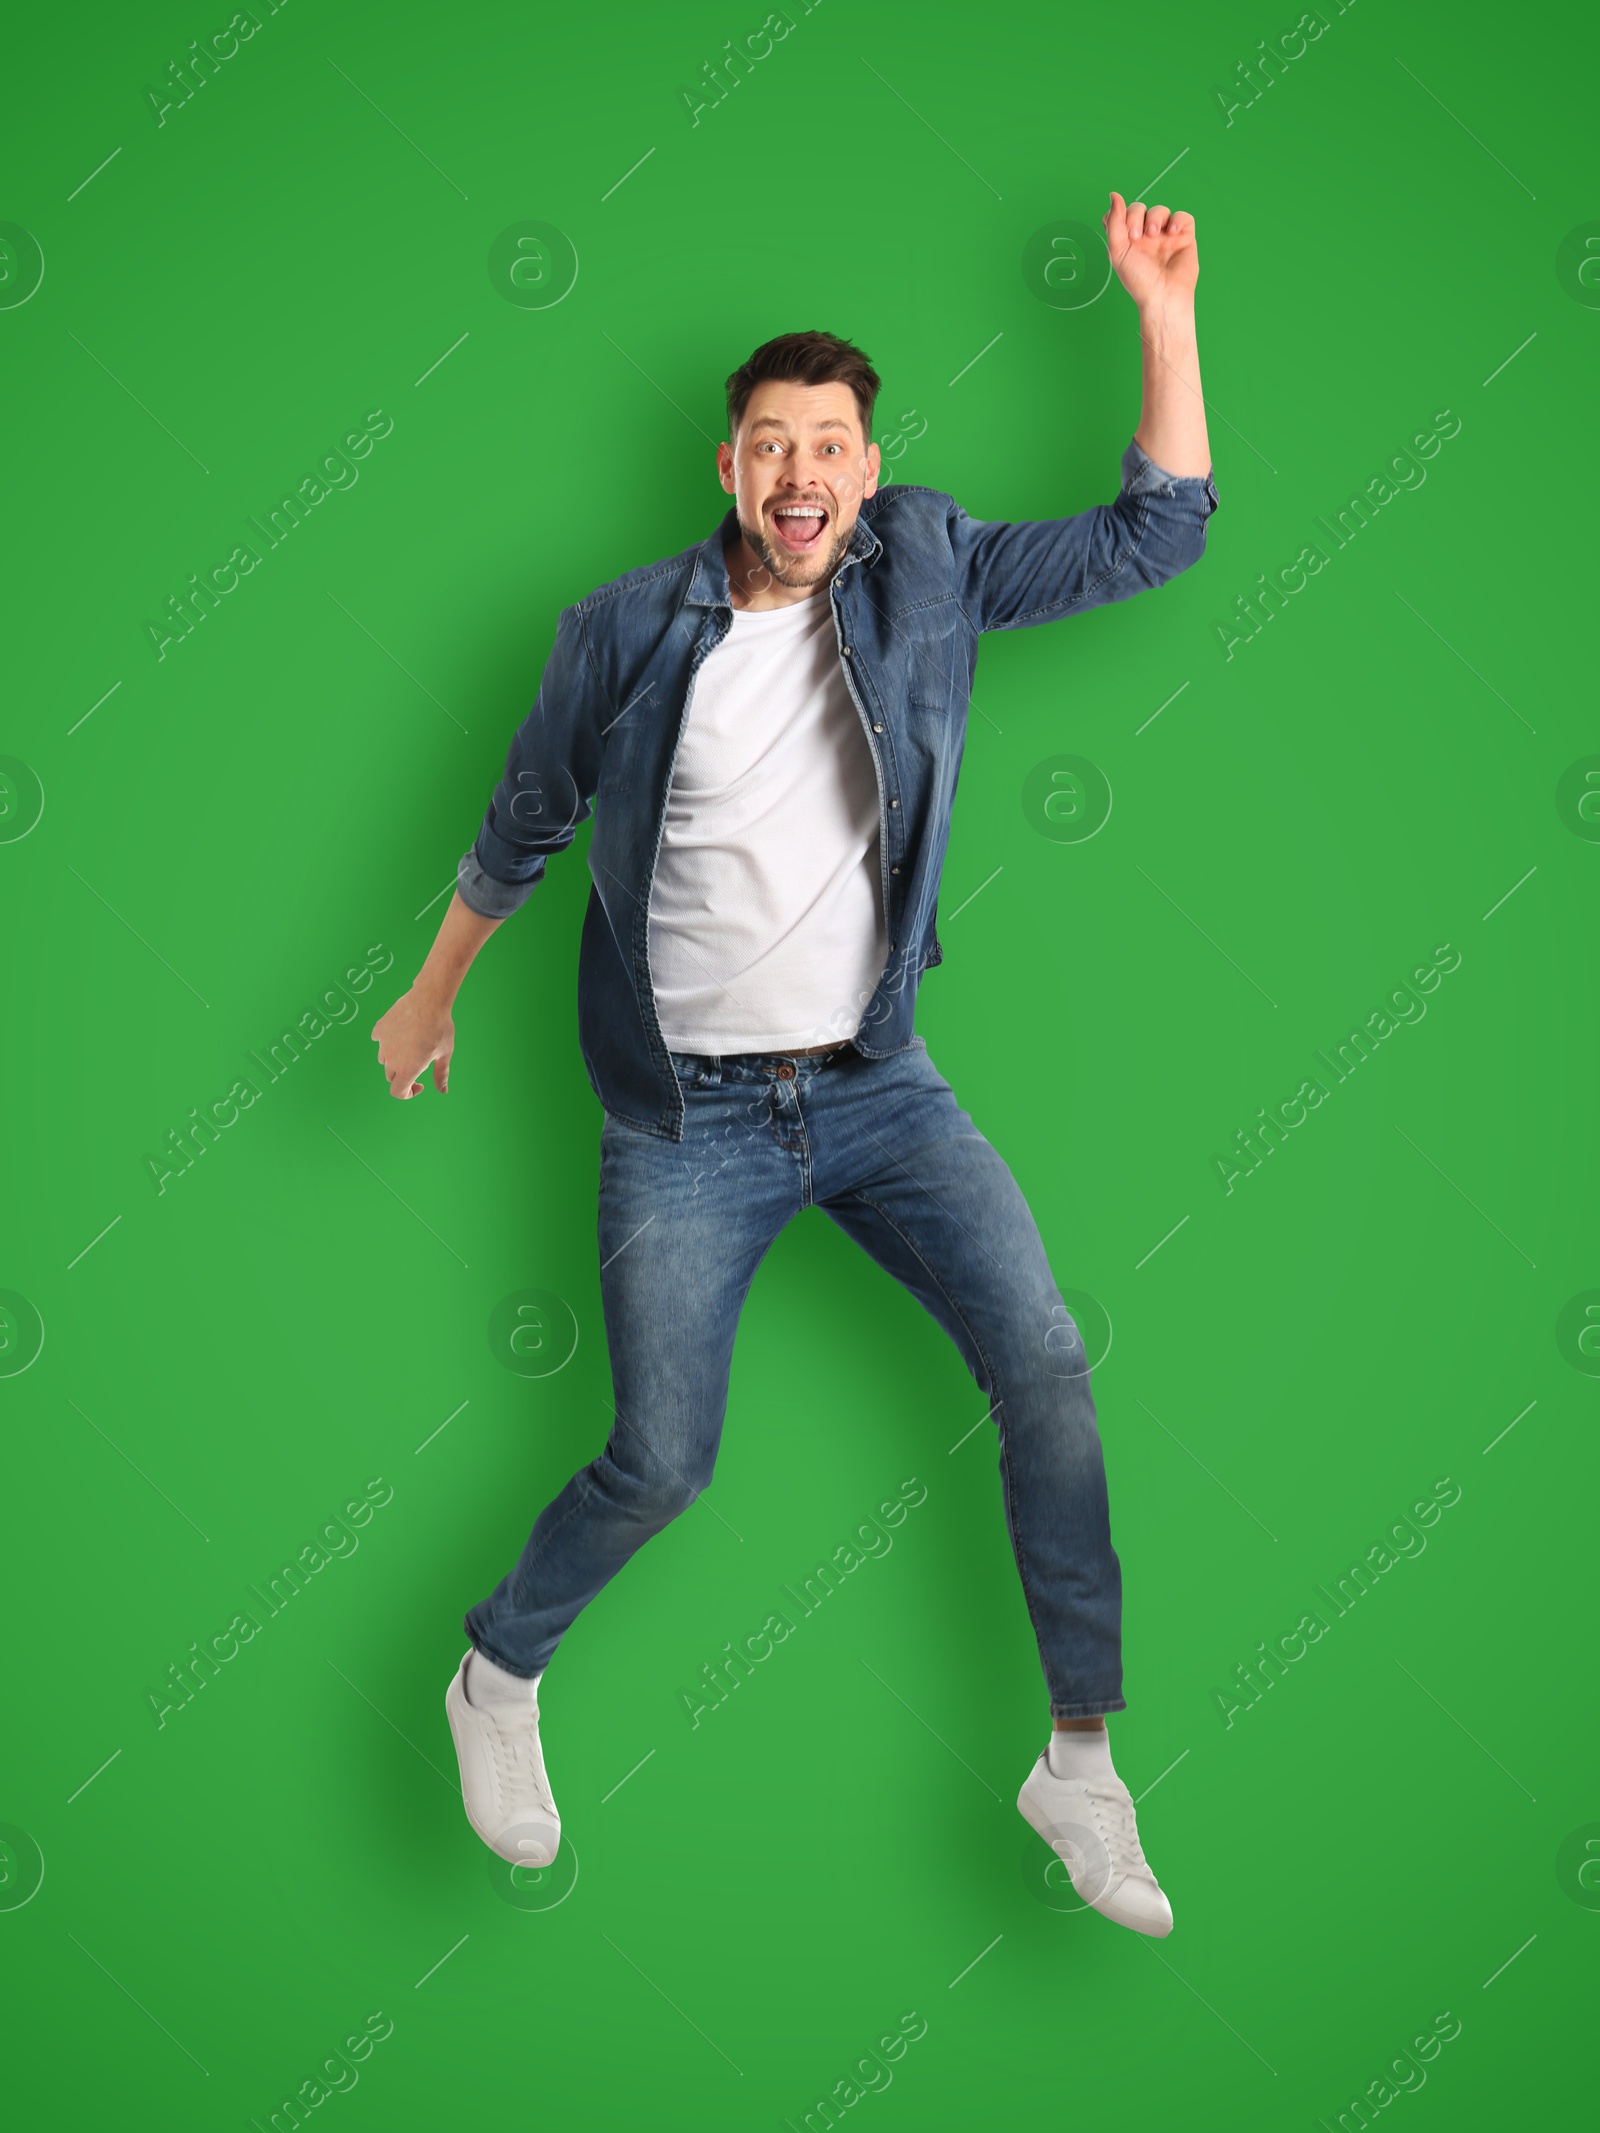 Image of Positive man jumping on bright green background